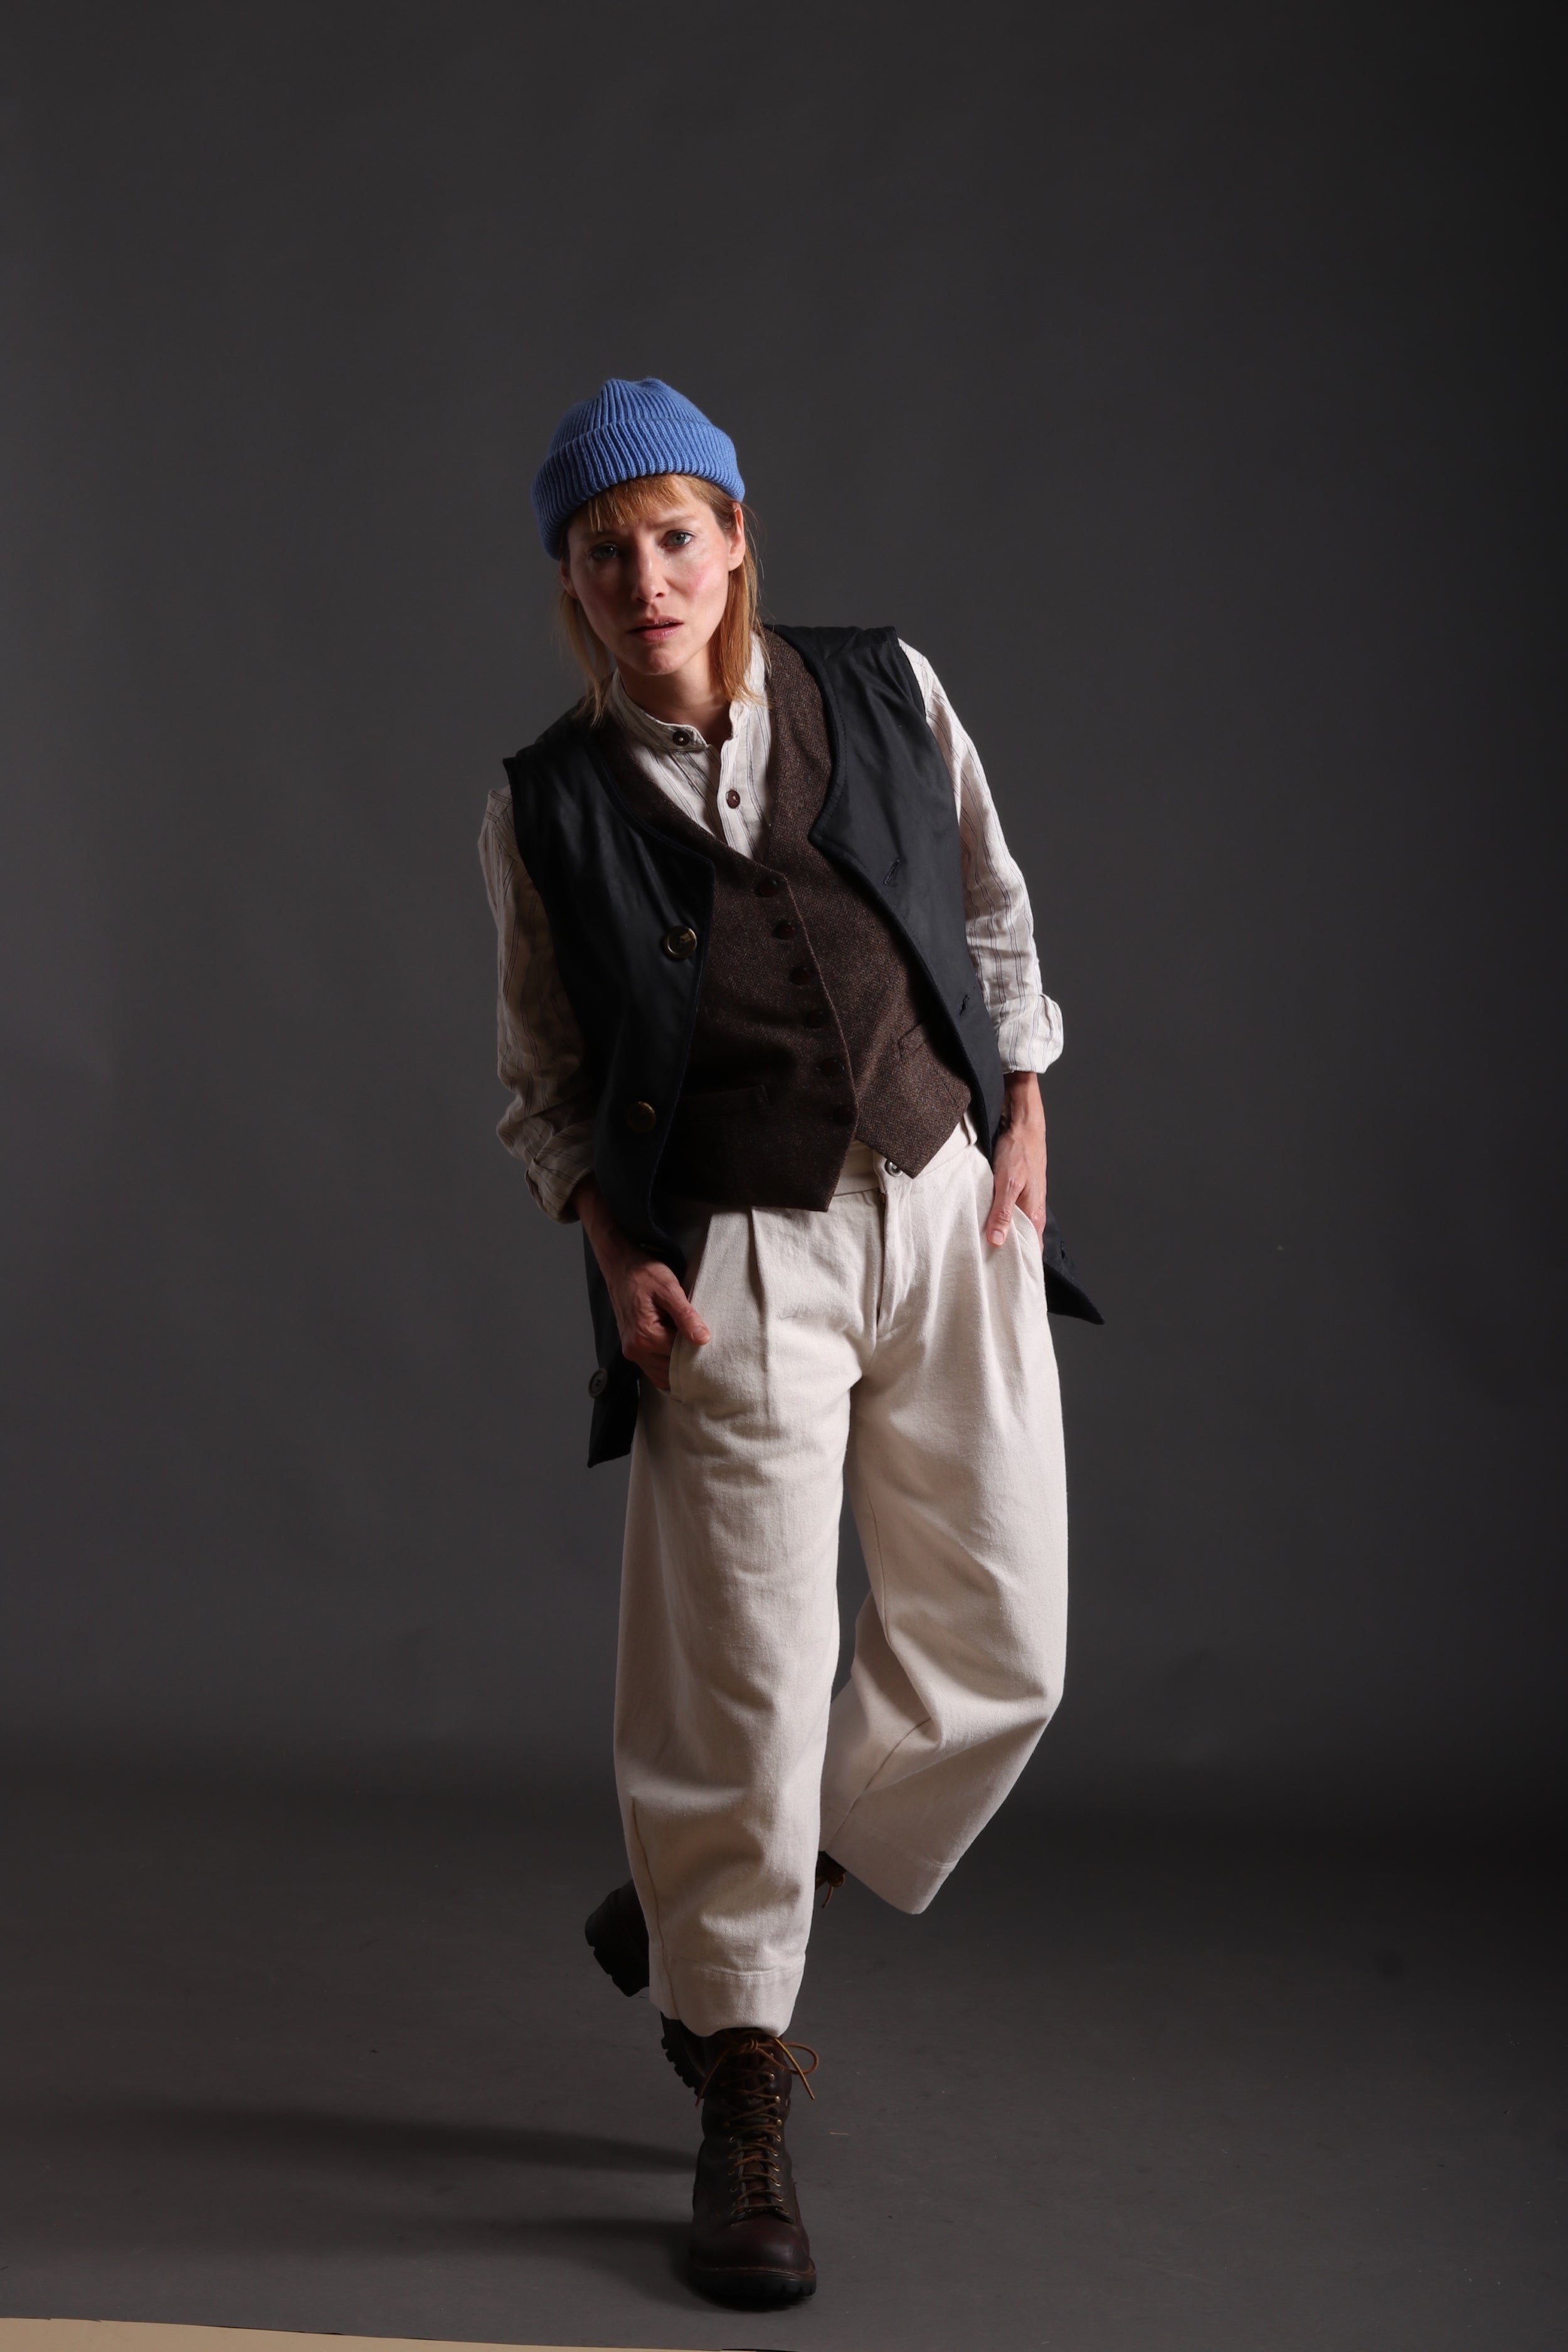 Sienna wears Carrier Company Wax Cotton Jerkin with linen collarless Work Shirt, Dutch Trouser in Seeded Denim and Wool Hat in Sky